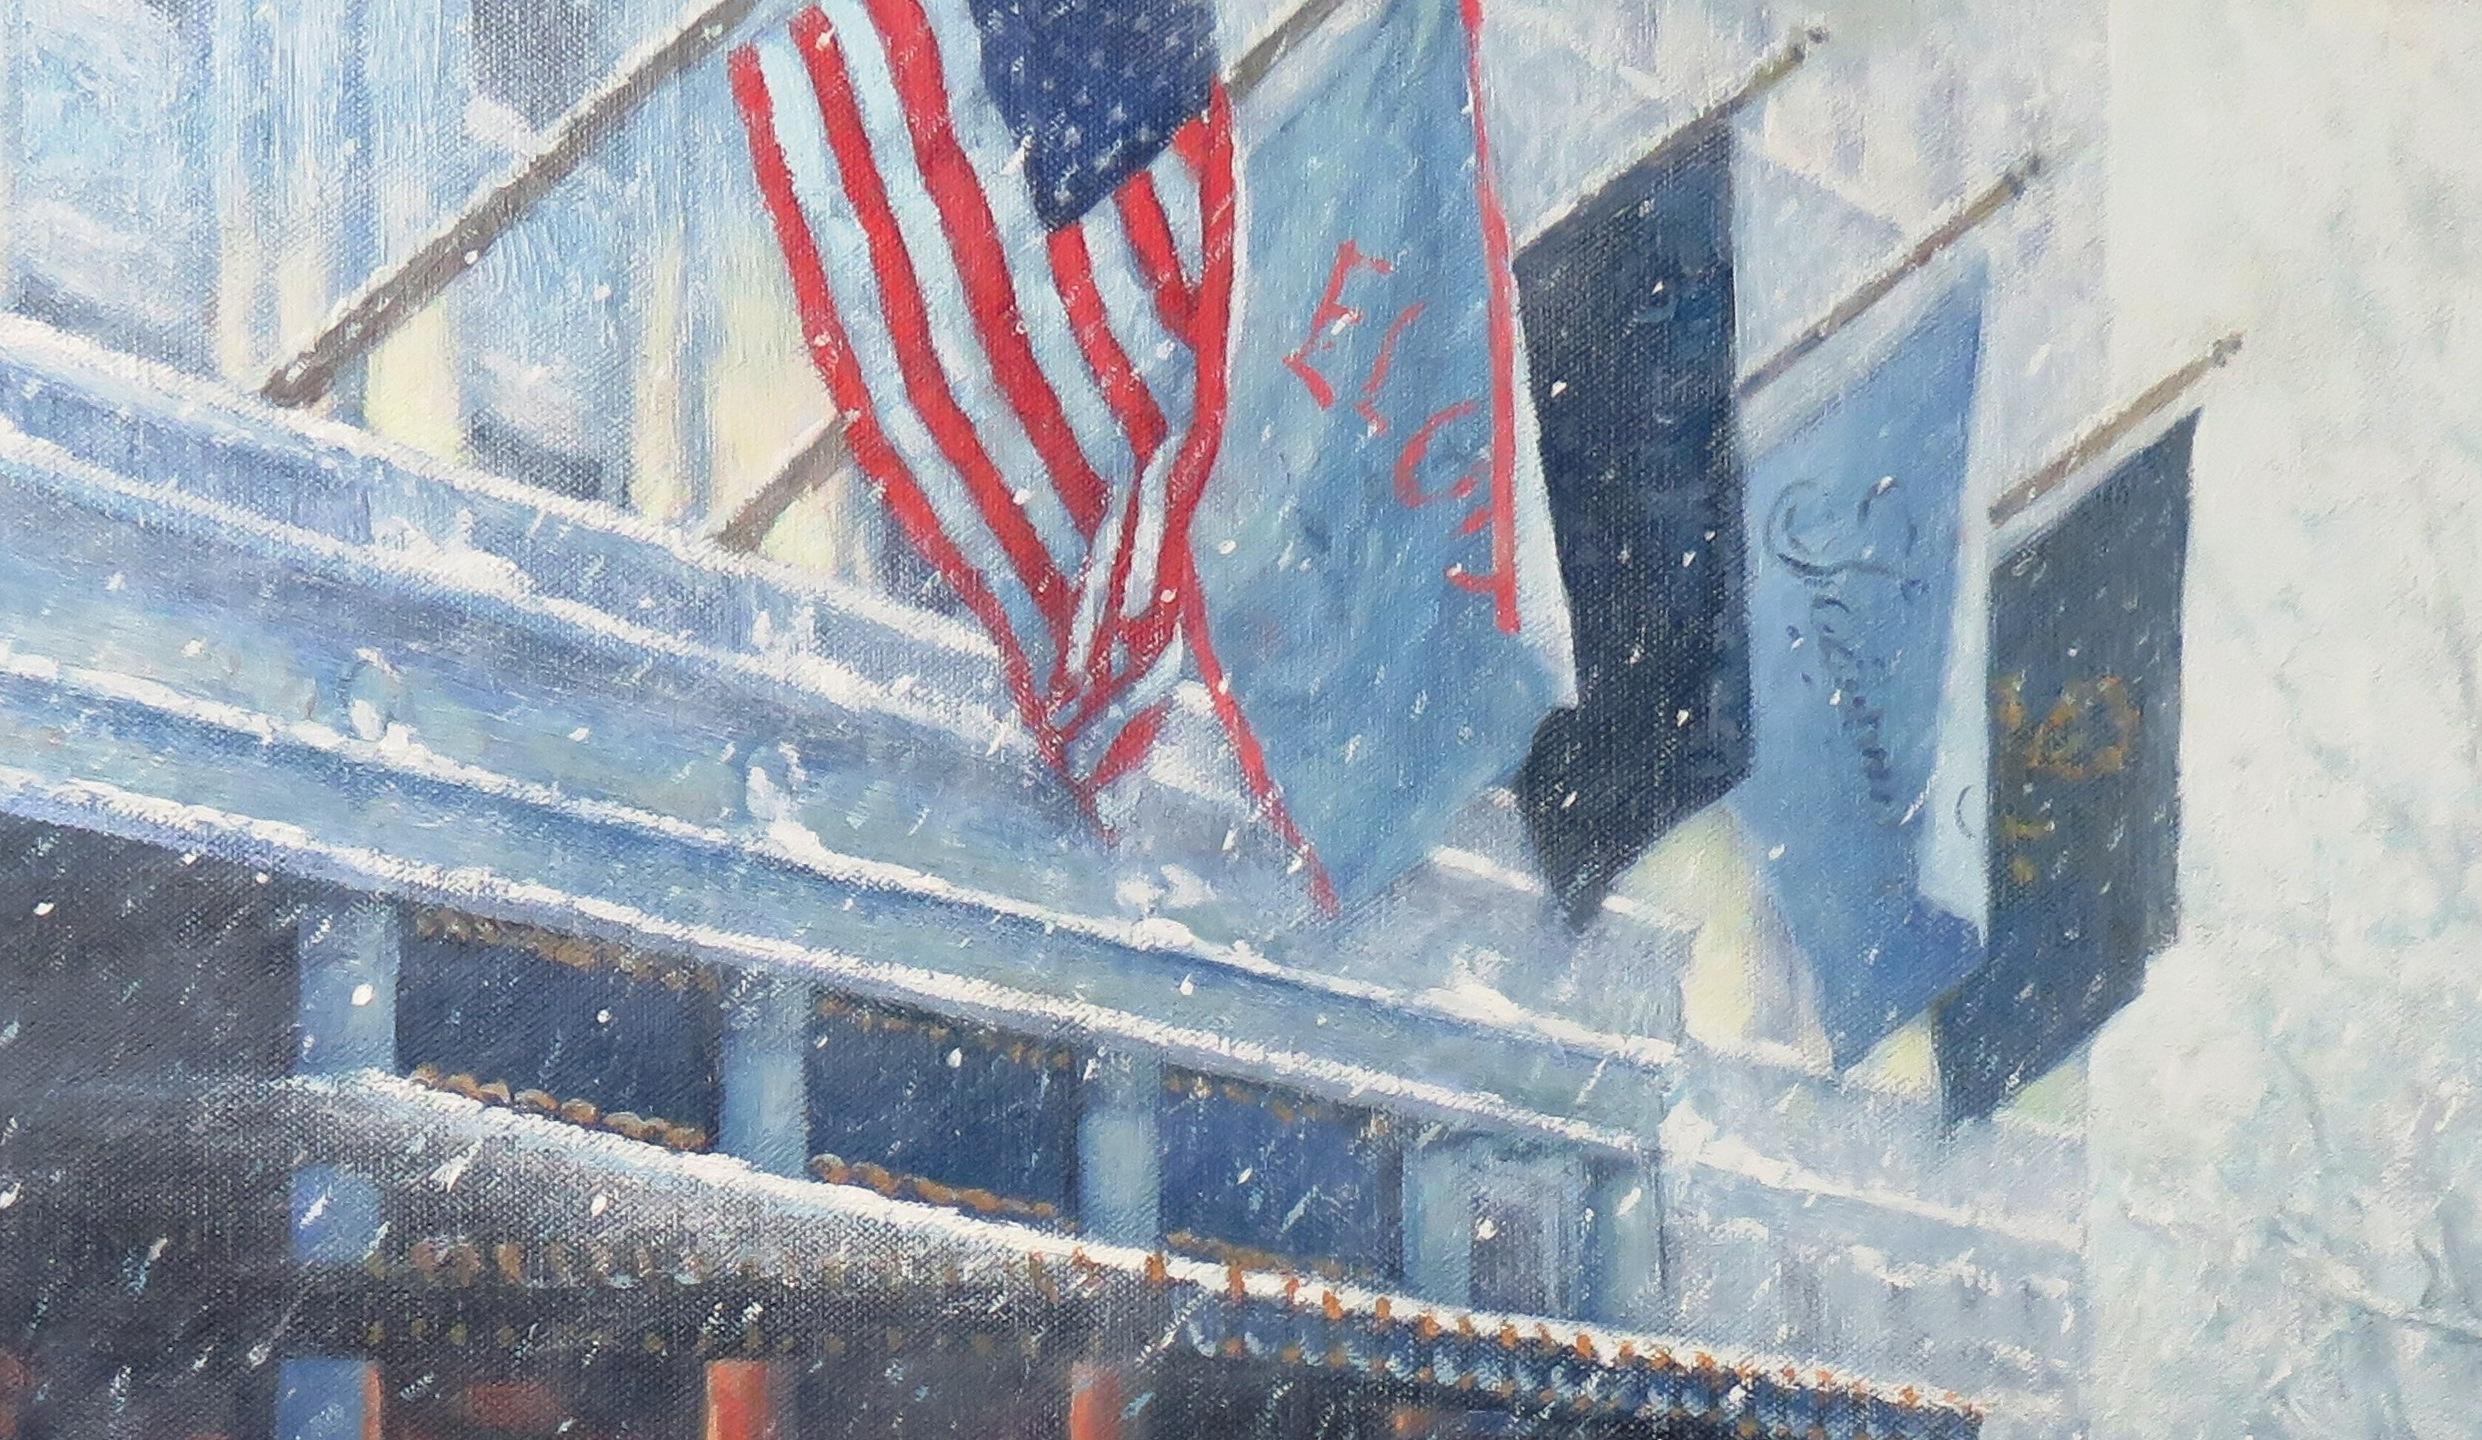 New York City Winter Landscape Plaza Hotel Oil Painting by Michael Budden 4